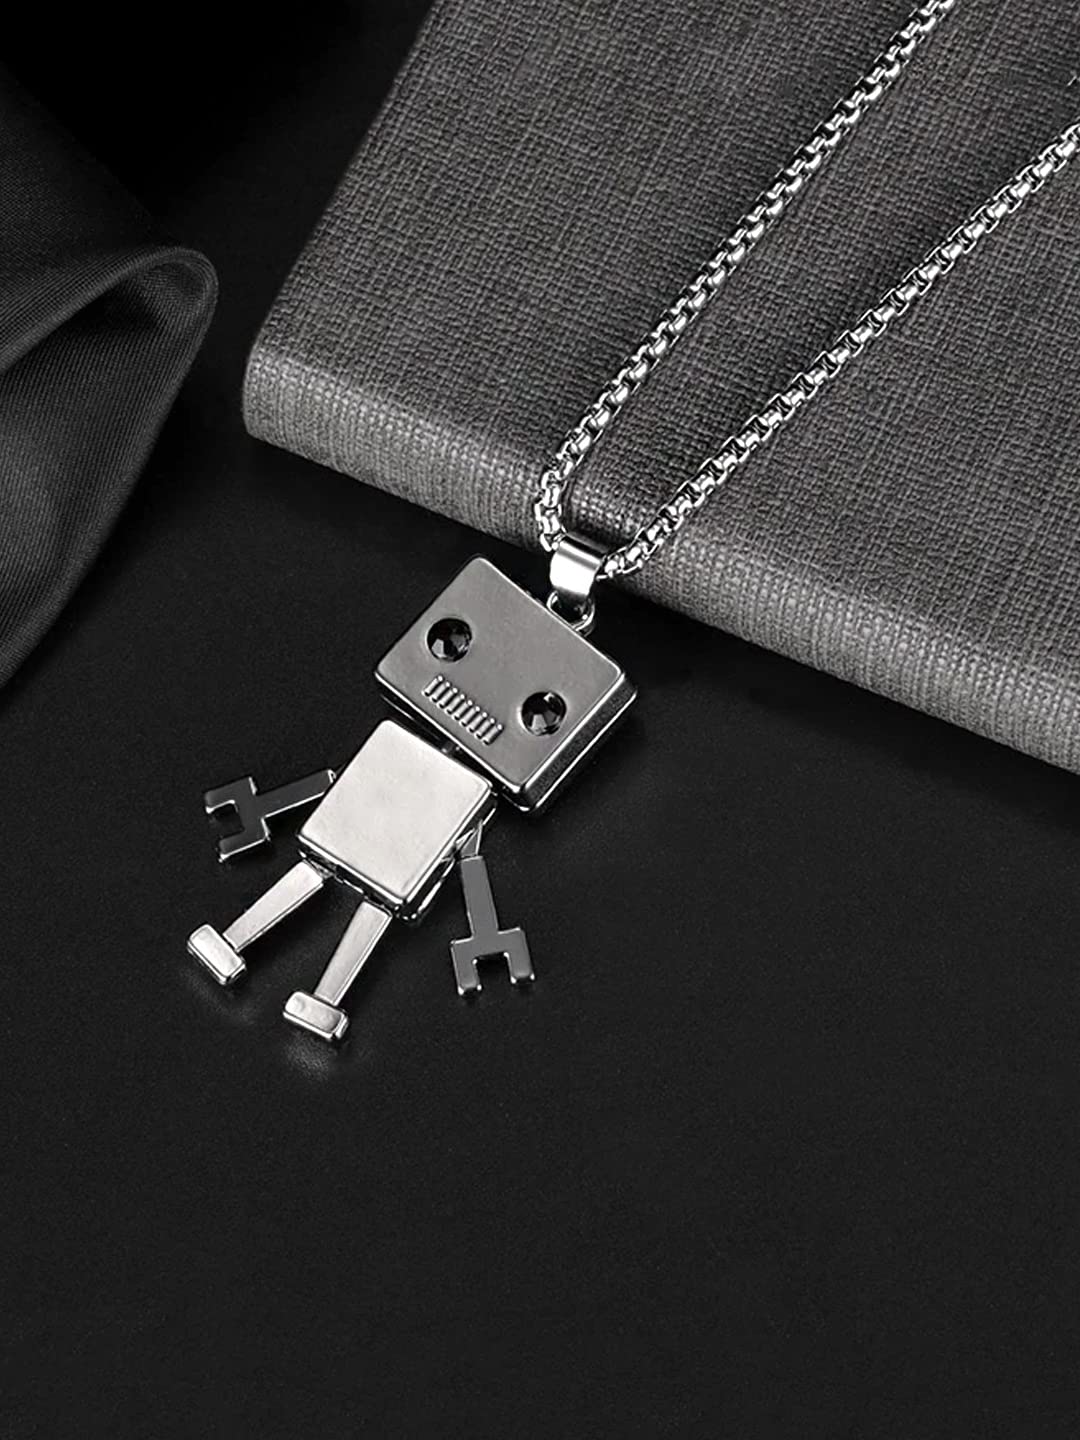 Yellow Chimes Chain Pendant for Girls Silver Chain Men Pendant Silver Toned Robot Design Locket Chain Pendant for Women and Men.